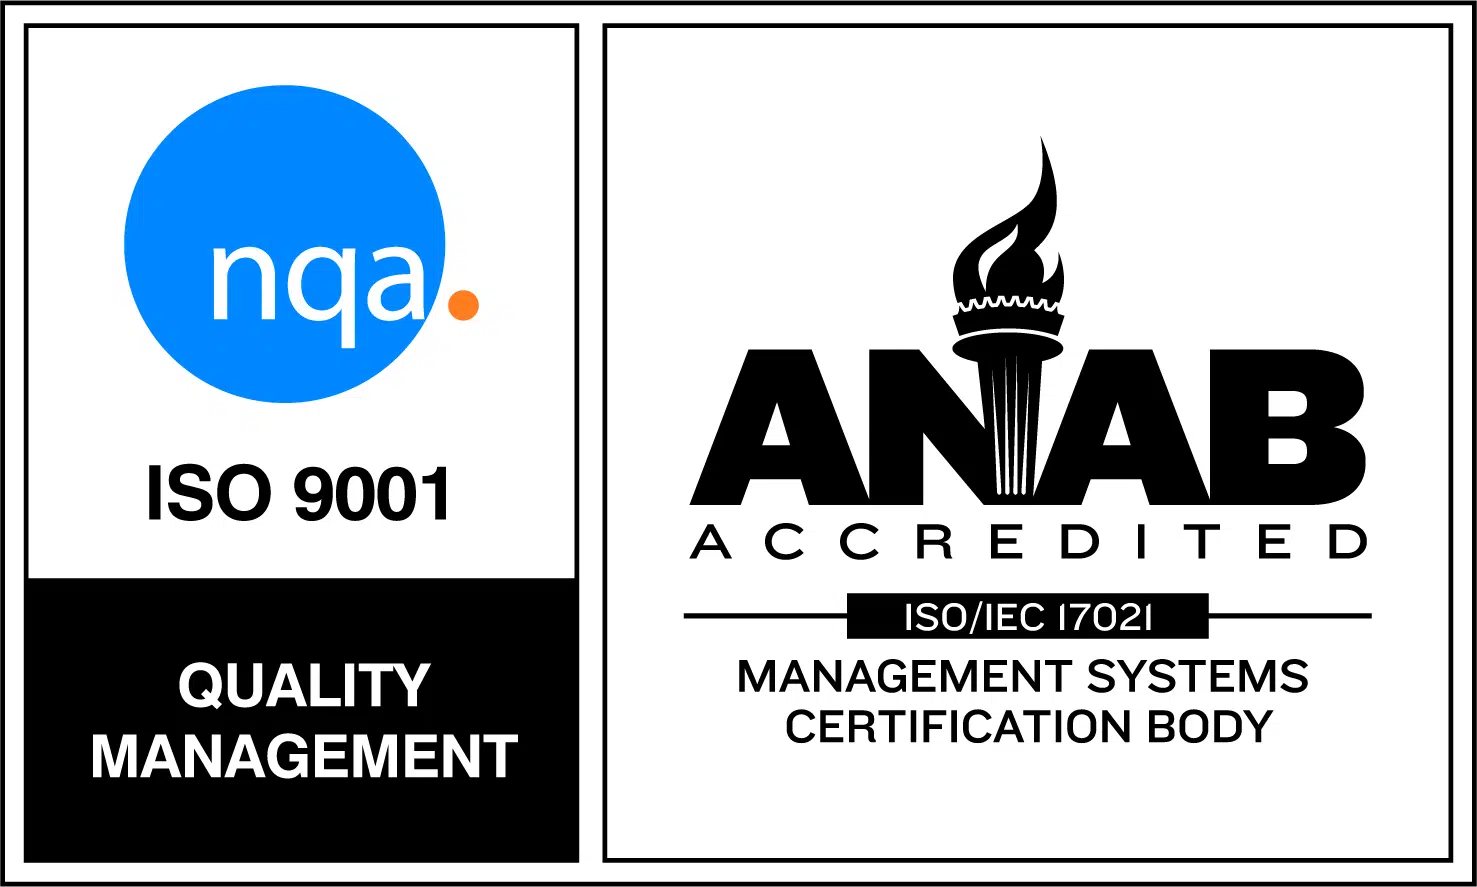 NQA ISO 9001 Certification Mark for Quality Management Systems